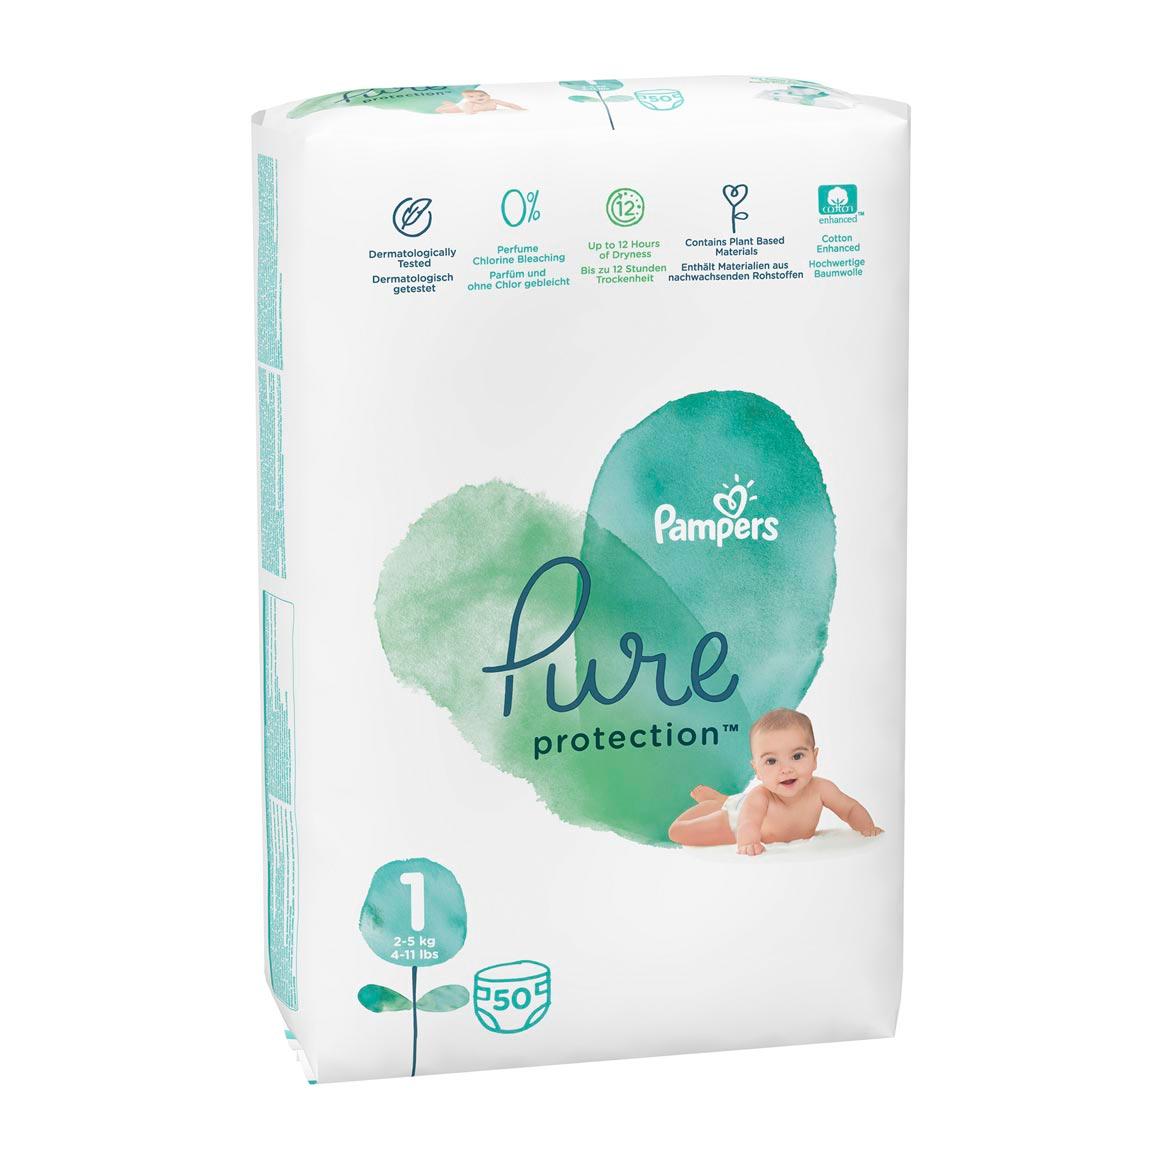 Pampers Pure Protection No 1(2 - 5 kg) Nappies 50 pk